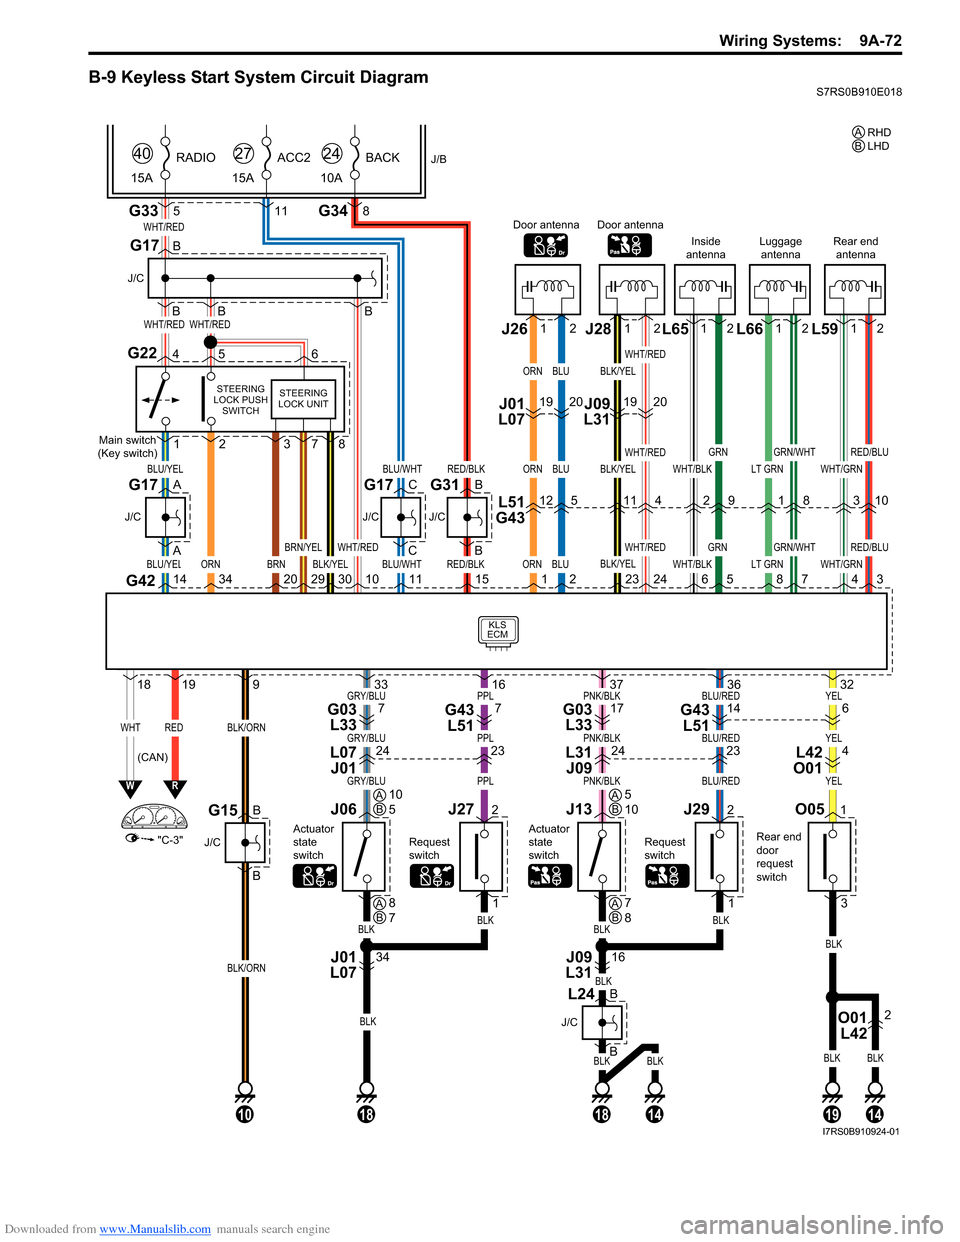 SUZUKI SWIFT 2007 2.G Service User Guide Downloaded from www.Manualslib.com manuals search engine Wiring Systems:  9A-72
B-9 Keyless Start System Circuit DiagramS7RS0B910E018
BLKBLK
BLK
BLKBLK
YELBLU/REDPNK/BLKPPLGRY/BLU
YELBLU/REDPNK/BLKPPL